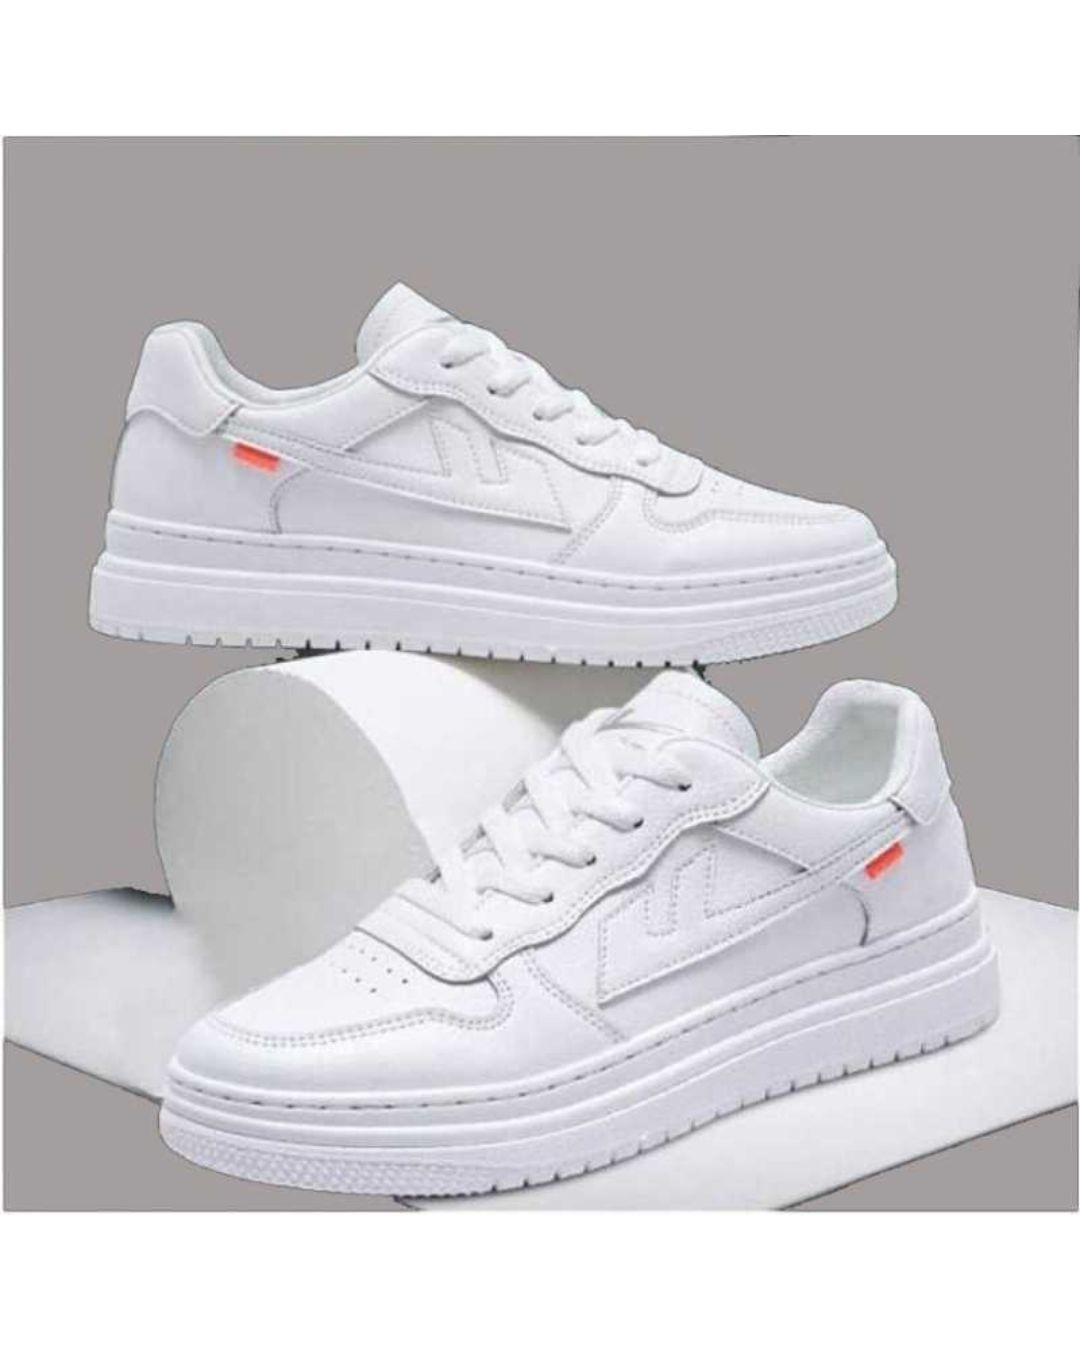 Thin Shoes For Summer White Shoes Men Sneakers Teen Shoes Without Lace  Trend 2018 New Feel Socks Shoes tenis masculino chaussure - OnshopDeals.Com